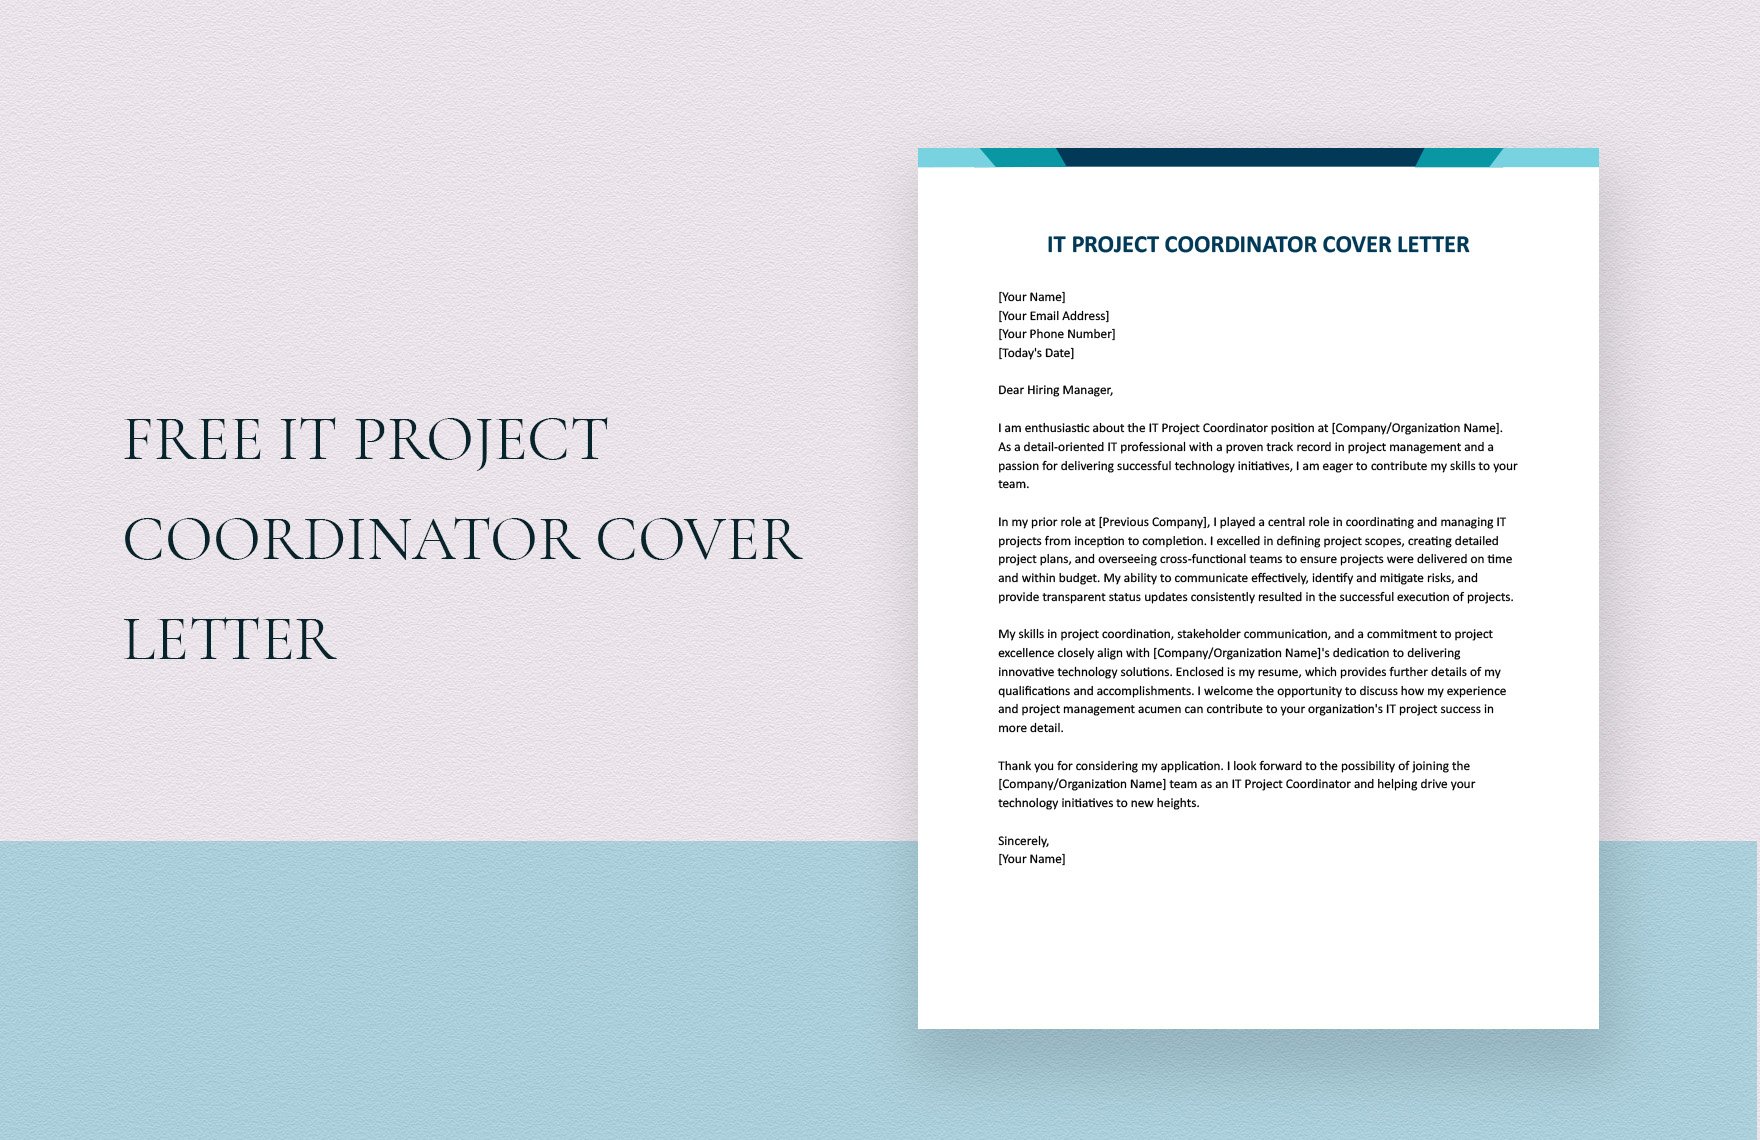 IT Project Coordinator Cover Letter